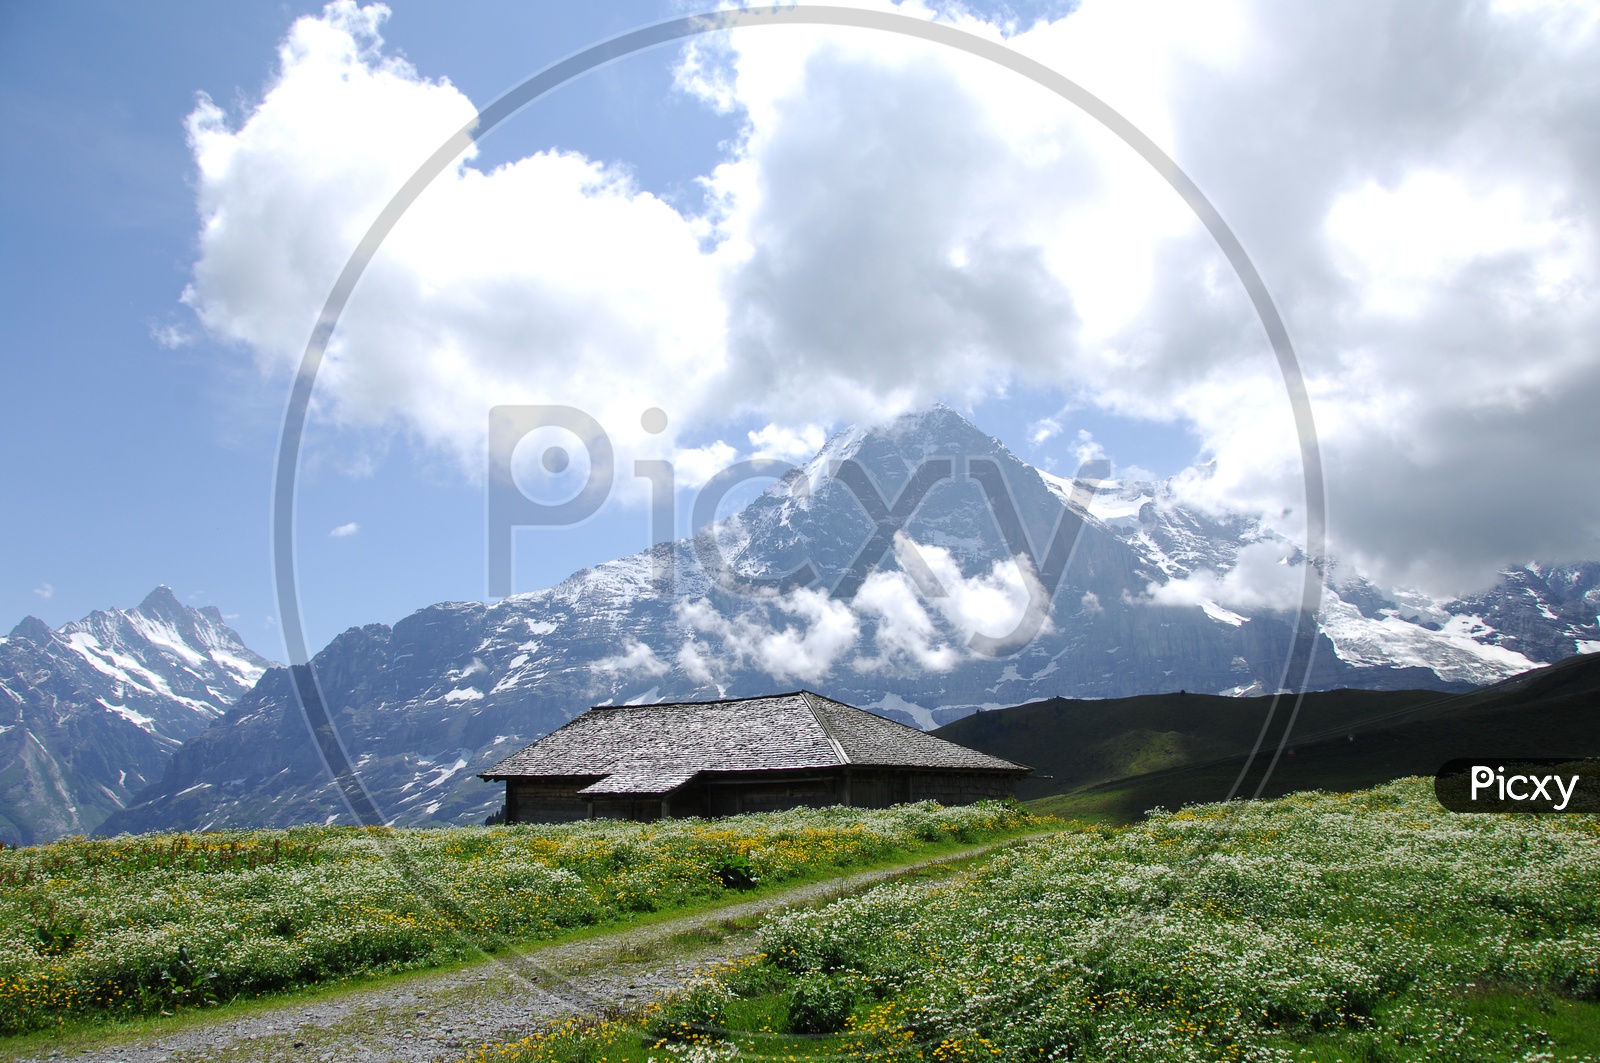 A swiss farm house with Swiss Alps in the background